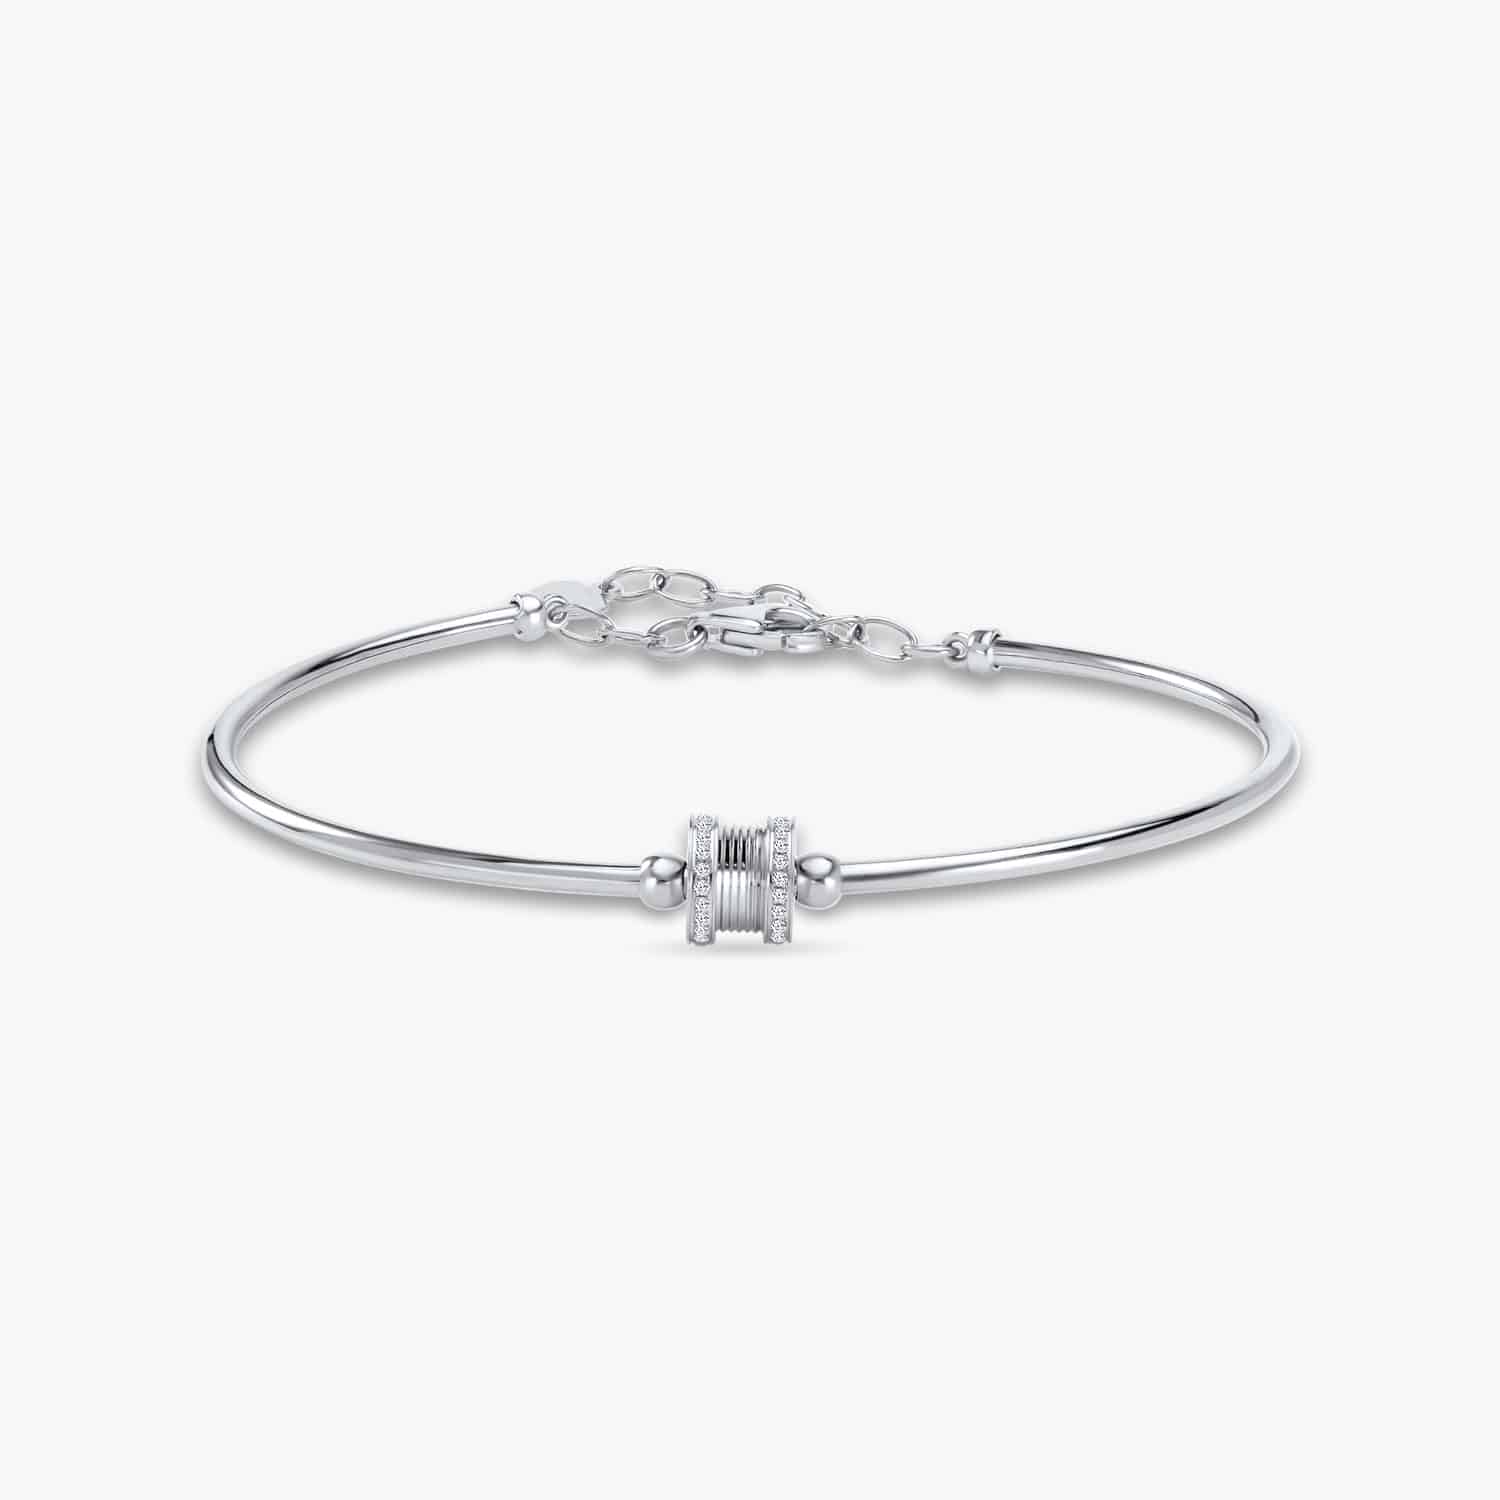 LvcPromise Diamond Bangle for woman in 18k White Gold